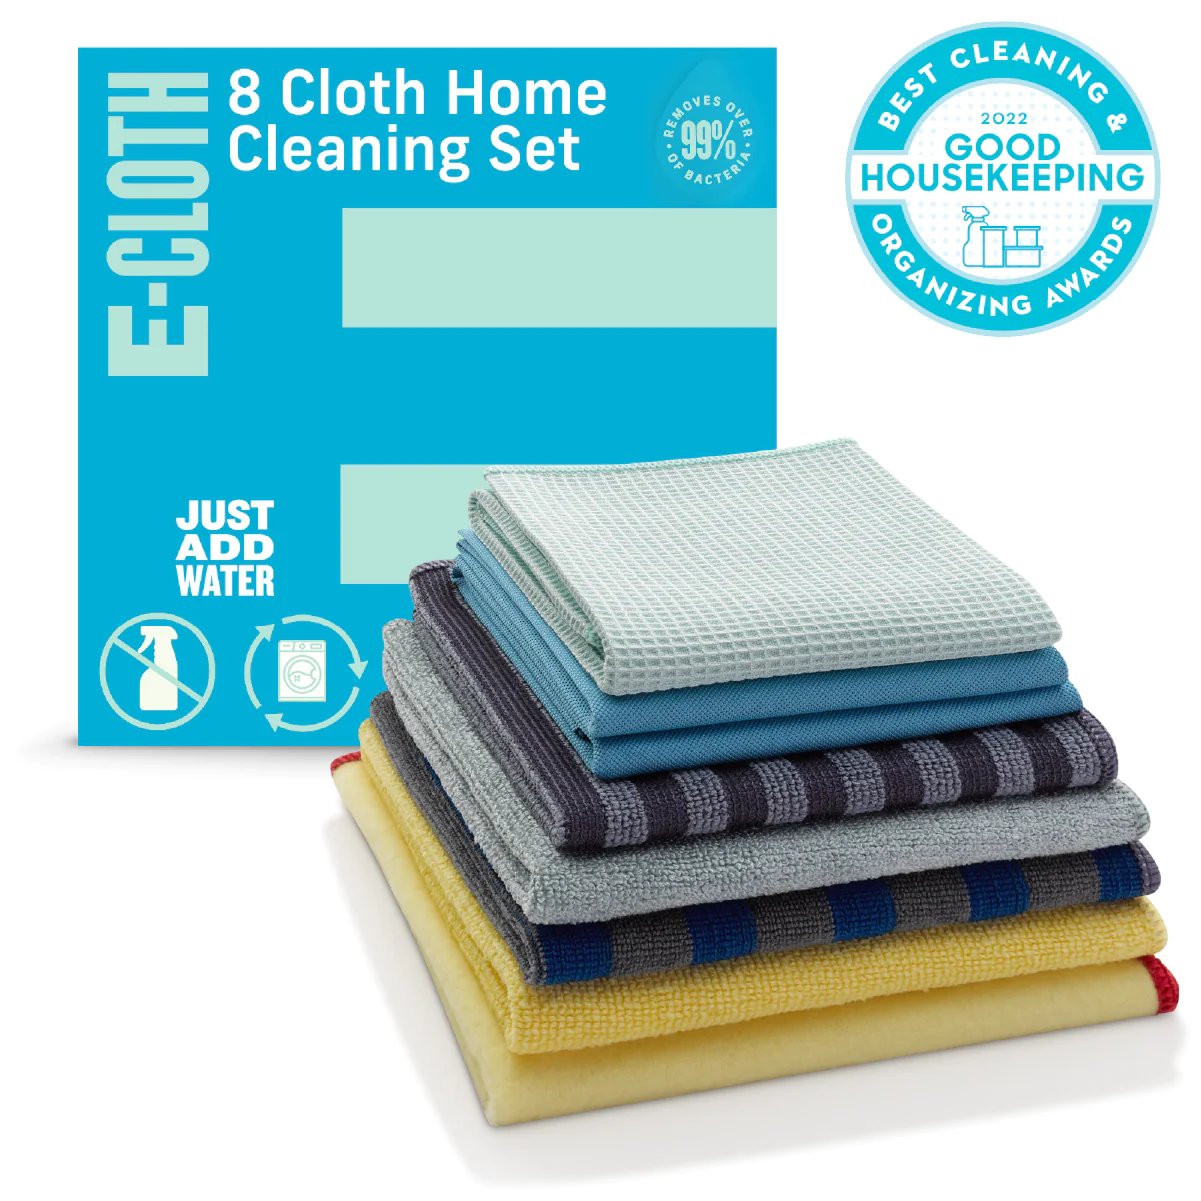 Home Cleaning Set 8 Cloths